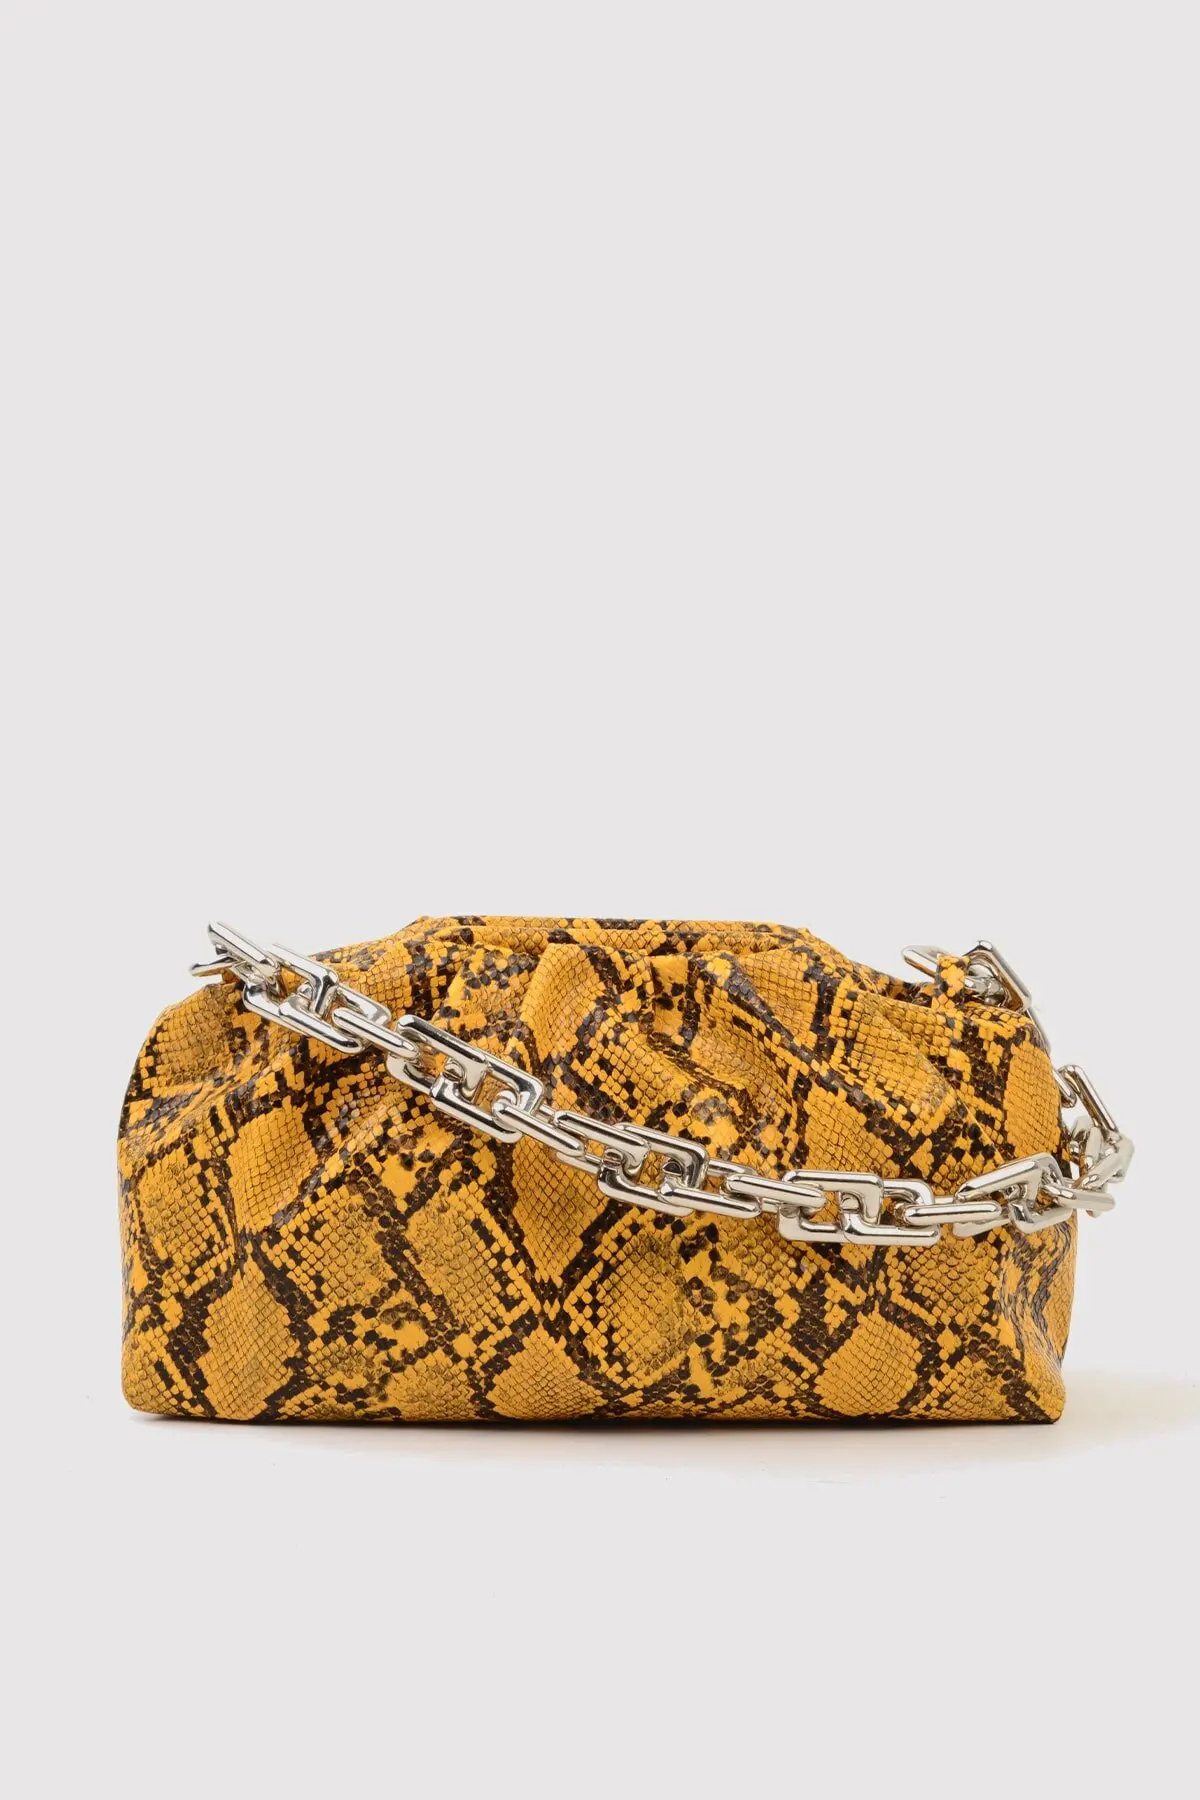 Women's Yellow Pouche With Snake Pattern Silver Chain Hand and Shoulder Bag Synthetic Leather Modern Stylish Design Handy